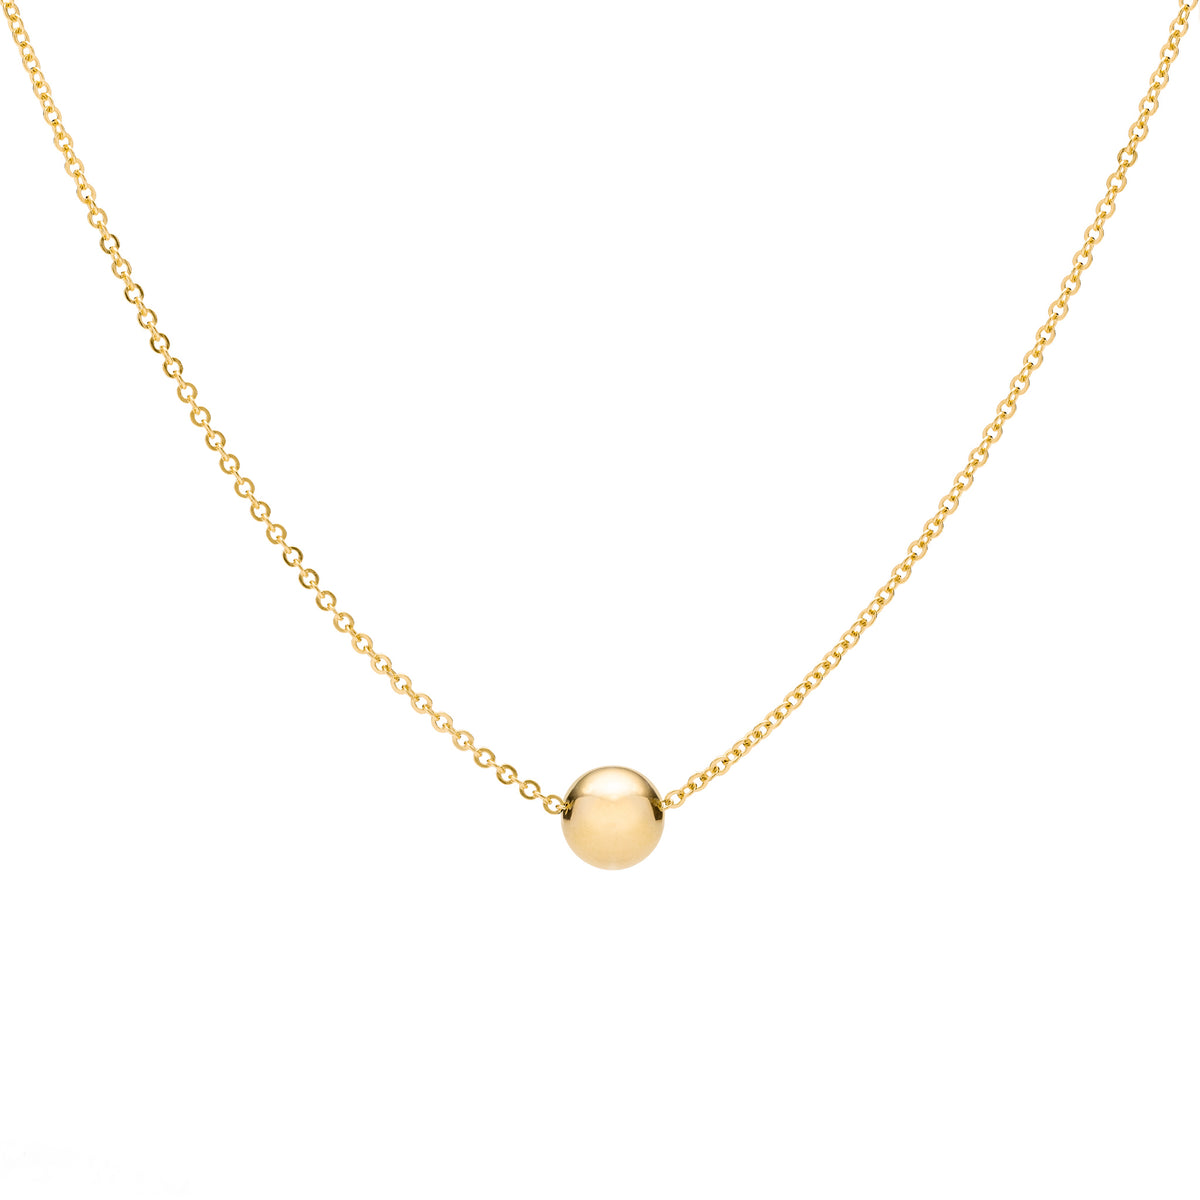 Wisdom 5 Stone Necklace in 14k Gold - 14k Yellow Gold / X-Small (15)